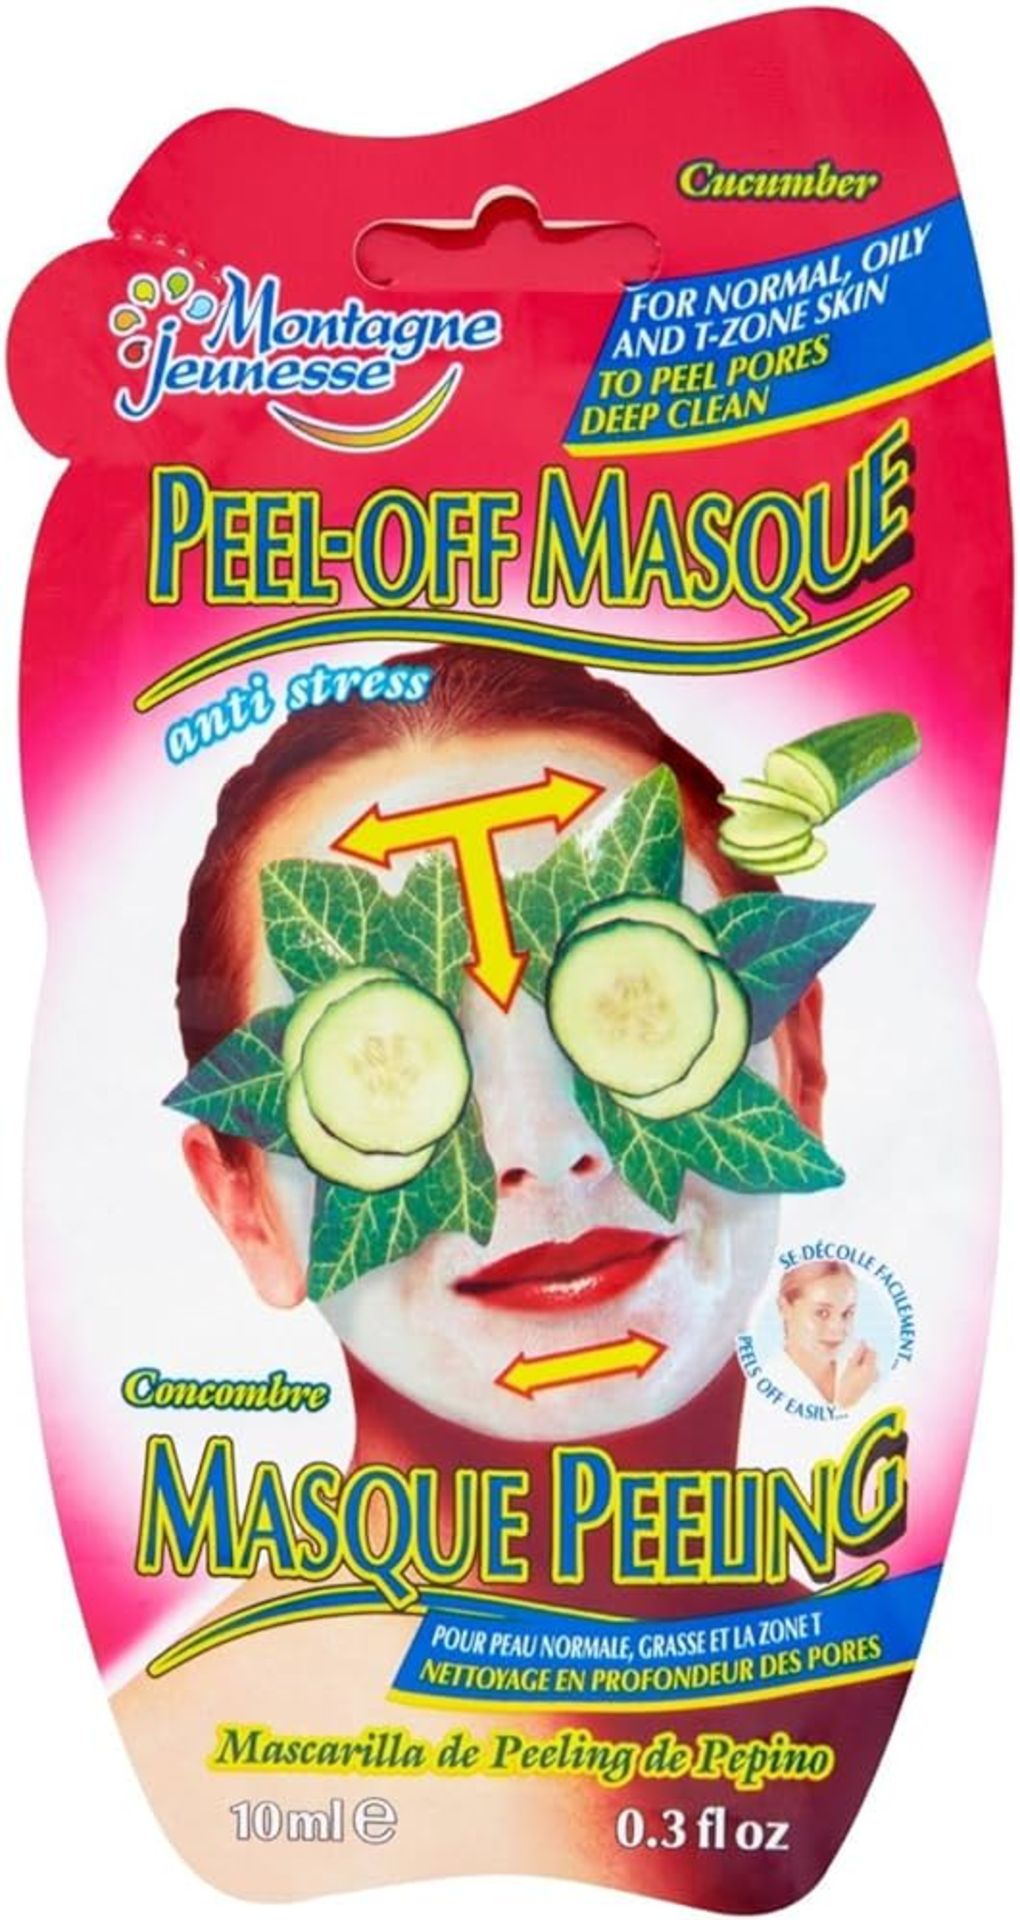 Bulk Trade Lot 200 x Montagne Jeunesse Face Masks. RRPs Vary from £2.50 - £6. This lot has a RRP - Image 14 of 16